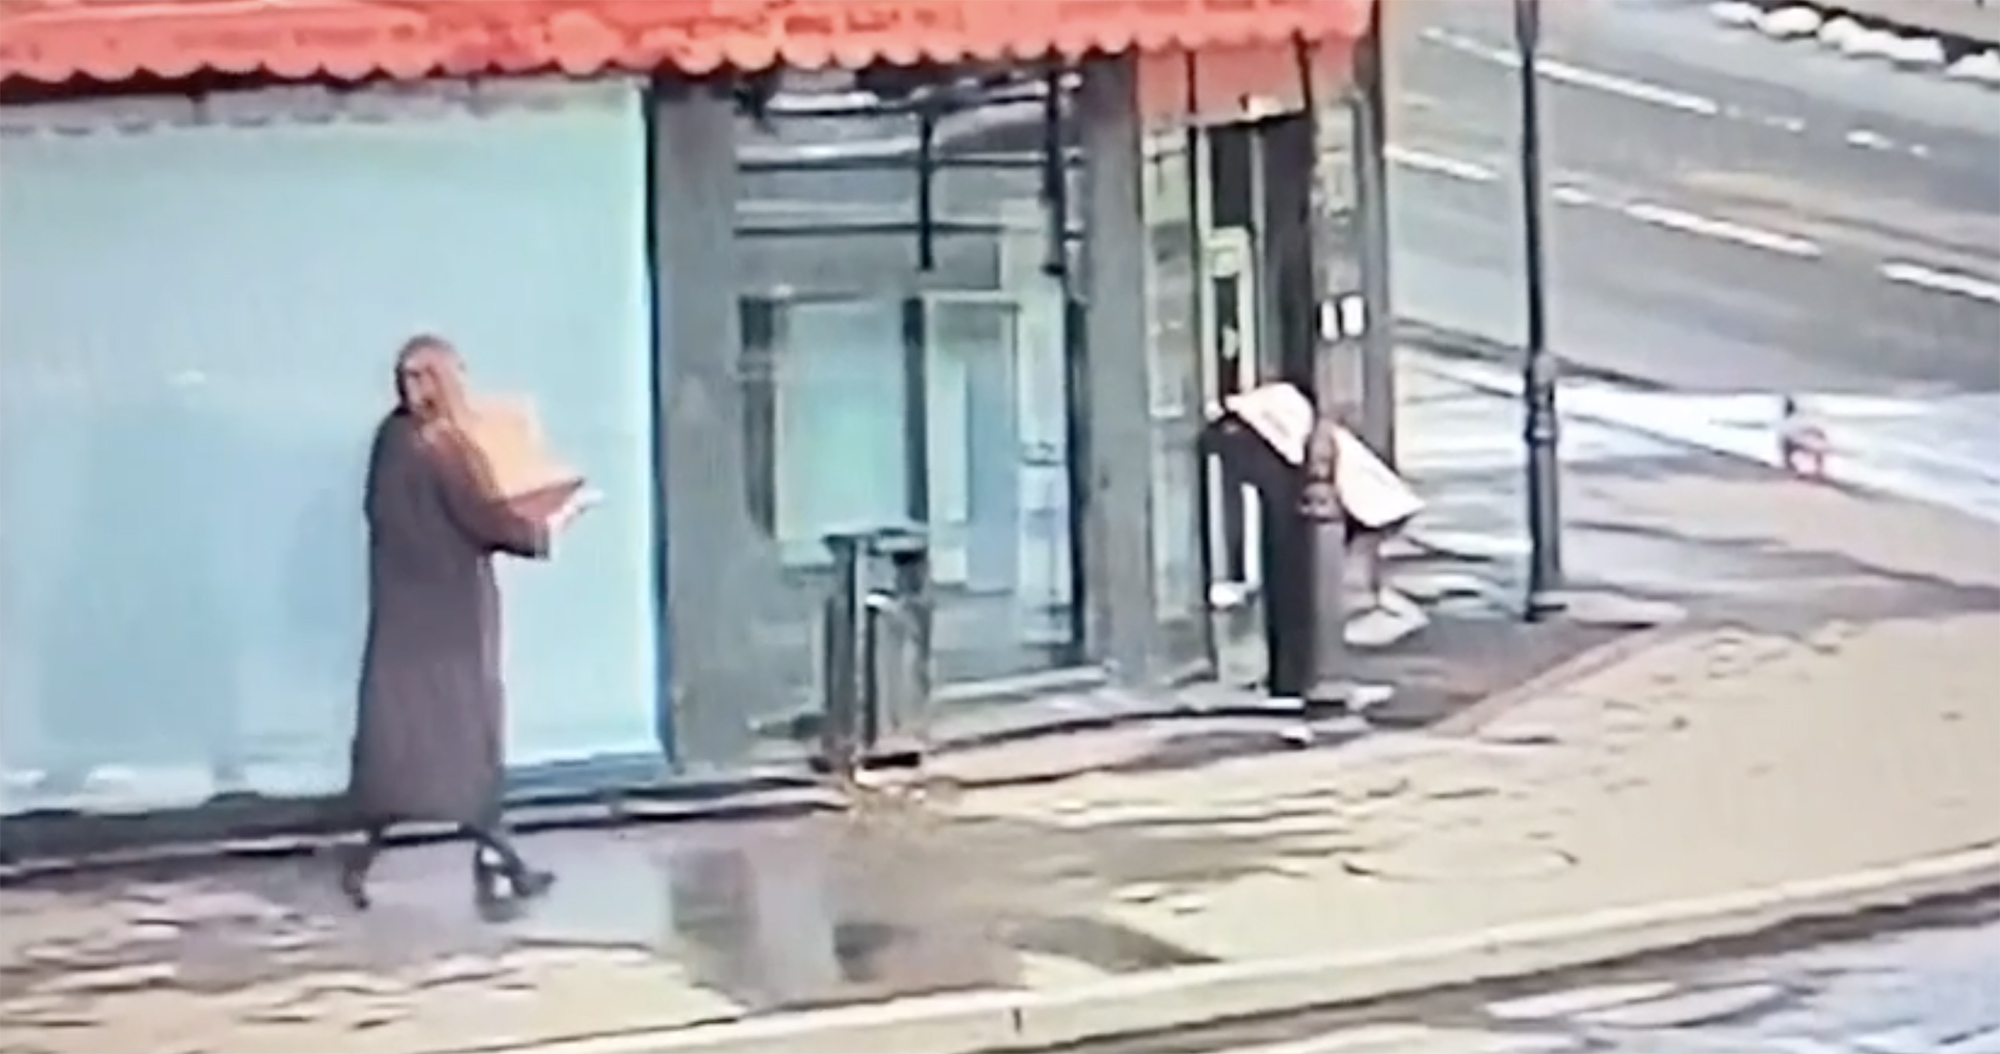 Footage allegedly showing Daria Trepova carrying a bulky box outside the cafe in St Petersburg, Russia, on April 2